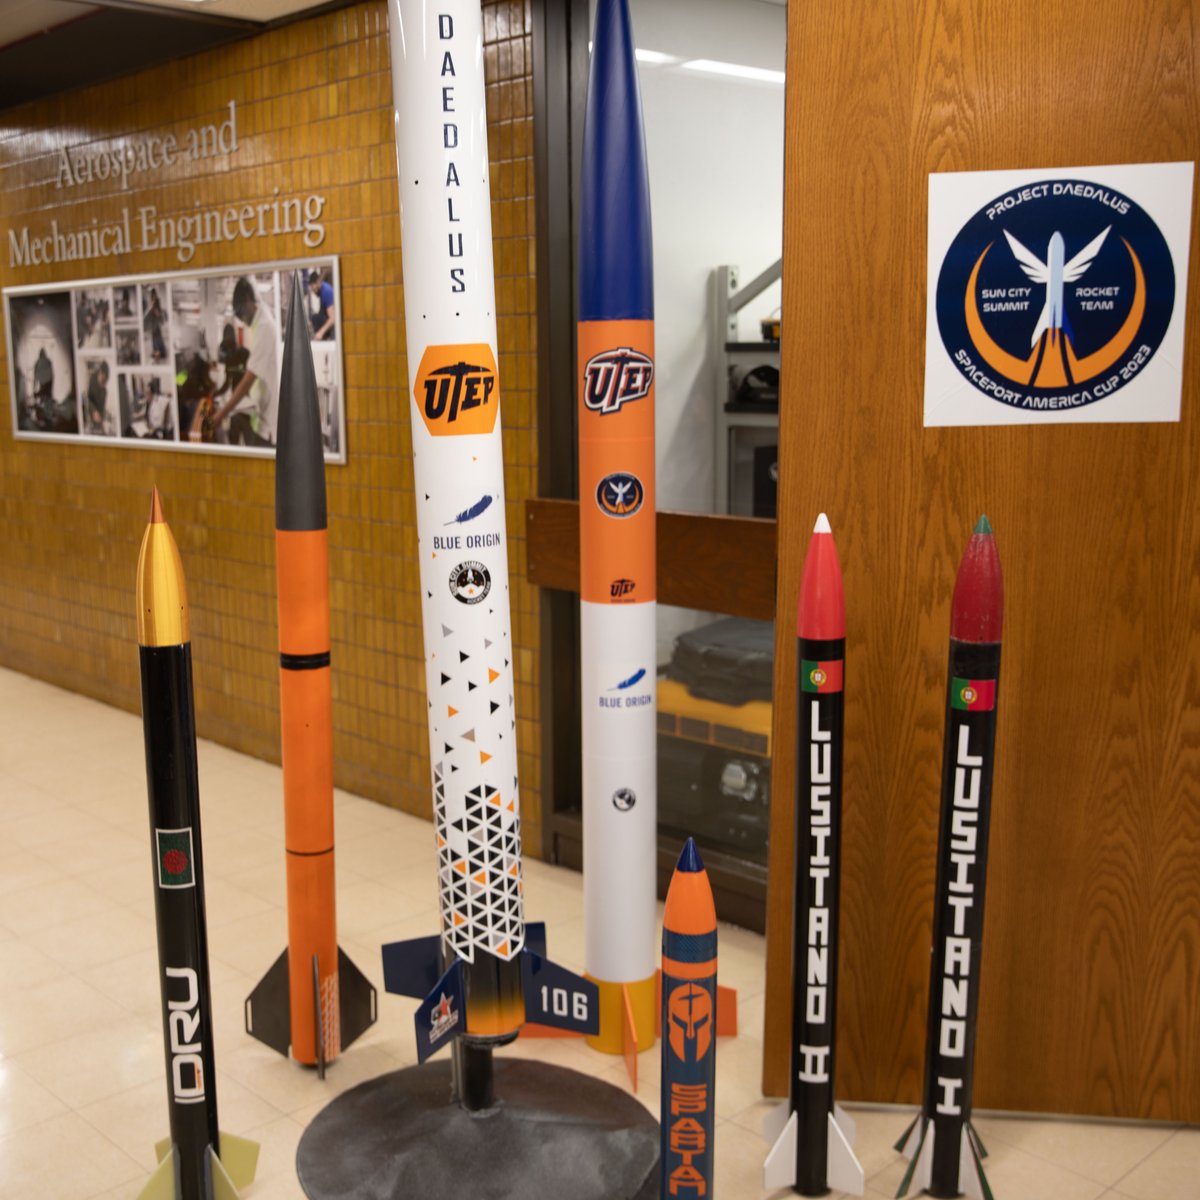 This morning, the UTEP Sun City Summit Rocket Team unveiled their rocket, Daedalus, named after a mythical Greek inventor, architect, and sculptor. The team departs Sunday to participate in the 2023 @Spaceport_Cup, the world’s largest student rocketry competition. #GoMiners!